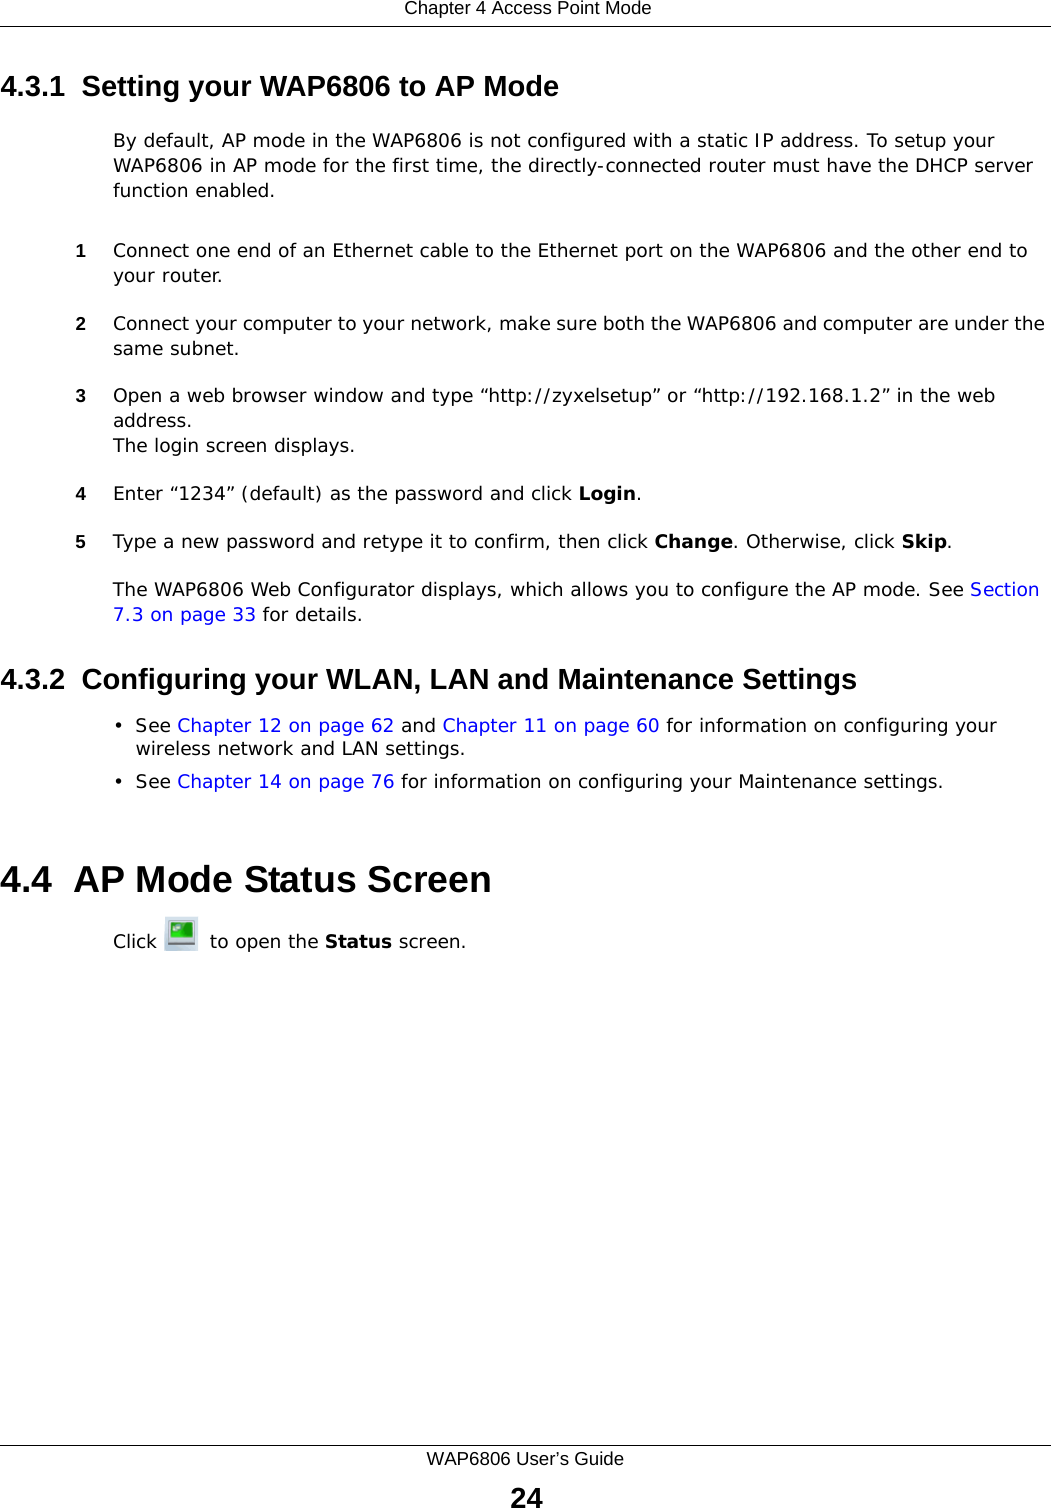  Chapter 4 Access Point ModeWAP6806 User’s Guide244.3.1  Setting your WAP6806 to AP ModeBy default, AP mode in the WAP6806 is not configured with a static IP address. To setup your WAP6806 in AP mode for the first time, the directly-connected router must have the DHCP server function enabled.1Connect one end of an Ethernet cable to the Ethernet port on the WAP6806 and the other end to your router.2Connect your computer to your network, make sure both the WAP6806 and computer are under the same subnet. 3Open a web browser window and type “http://zyxelsetup” or “http://192.168.1.2” in the web address.The login screen displays. 4Enter “1234” (default) as the password and click Login.5Type a new password and retype it to confirm, then click Change. Otherwise, click Skip.The WAP6806 Web Configurator displays, which allows you to configure the AP mode. See Section 7.3 on page 33 for details. 4.3.2  Configuring your WLAN, LAN and Maintenance Settings•See Chapter 12 on page 62 and Chapter 11 on page 60 for information on configuring your wireless network and LAN settings.•See Chapter 14 on page 76 for information on configuring your Maintenance settings.4.4  AP Mode Status ScreenClick   to open the Status screen.